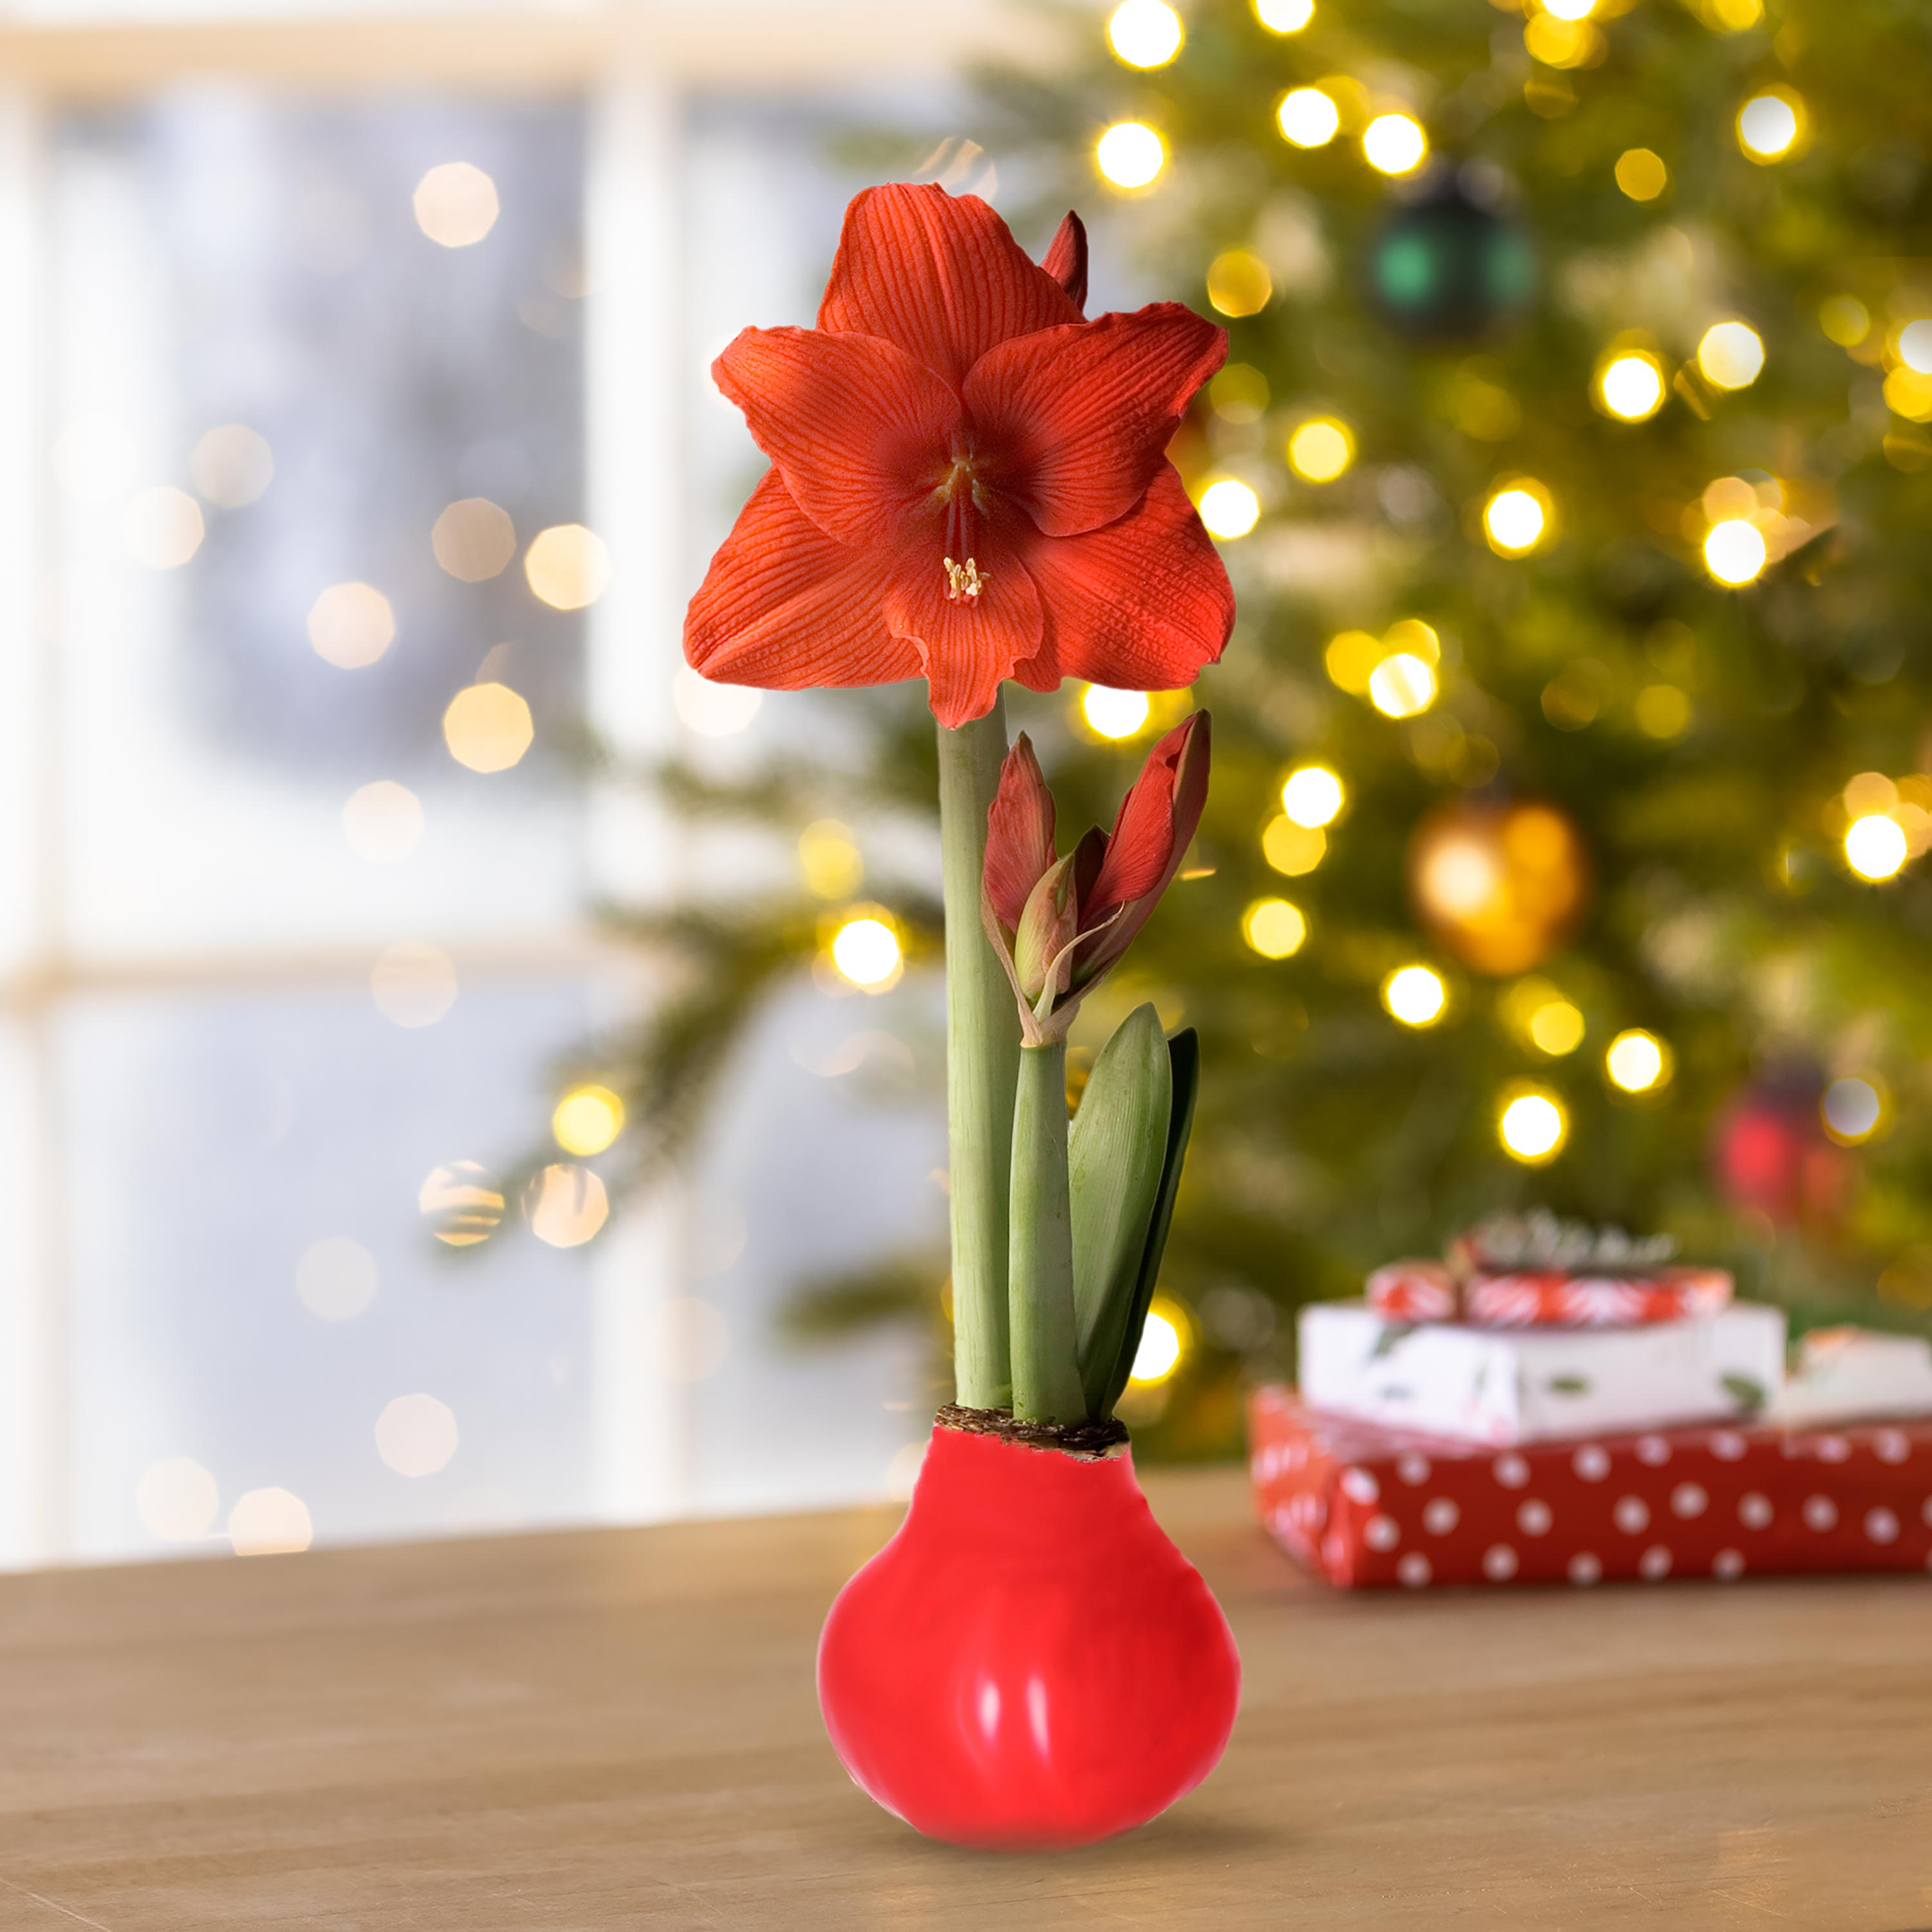 Waxz Solid Color Self-Contained Amaryllis Flower Bulb